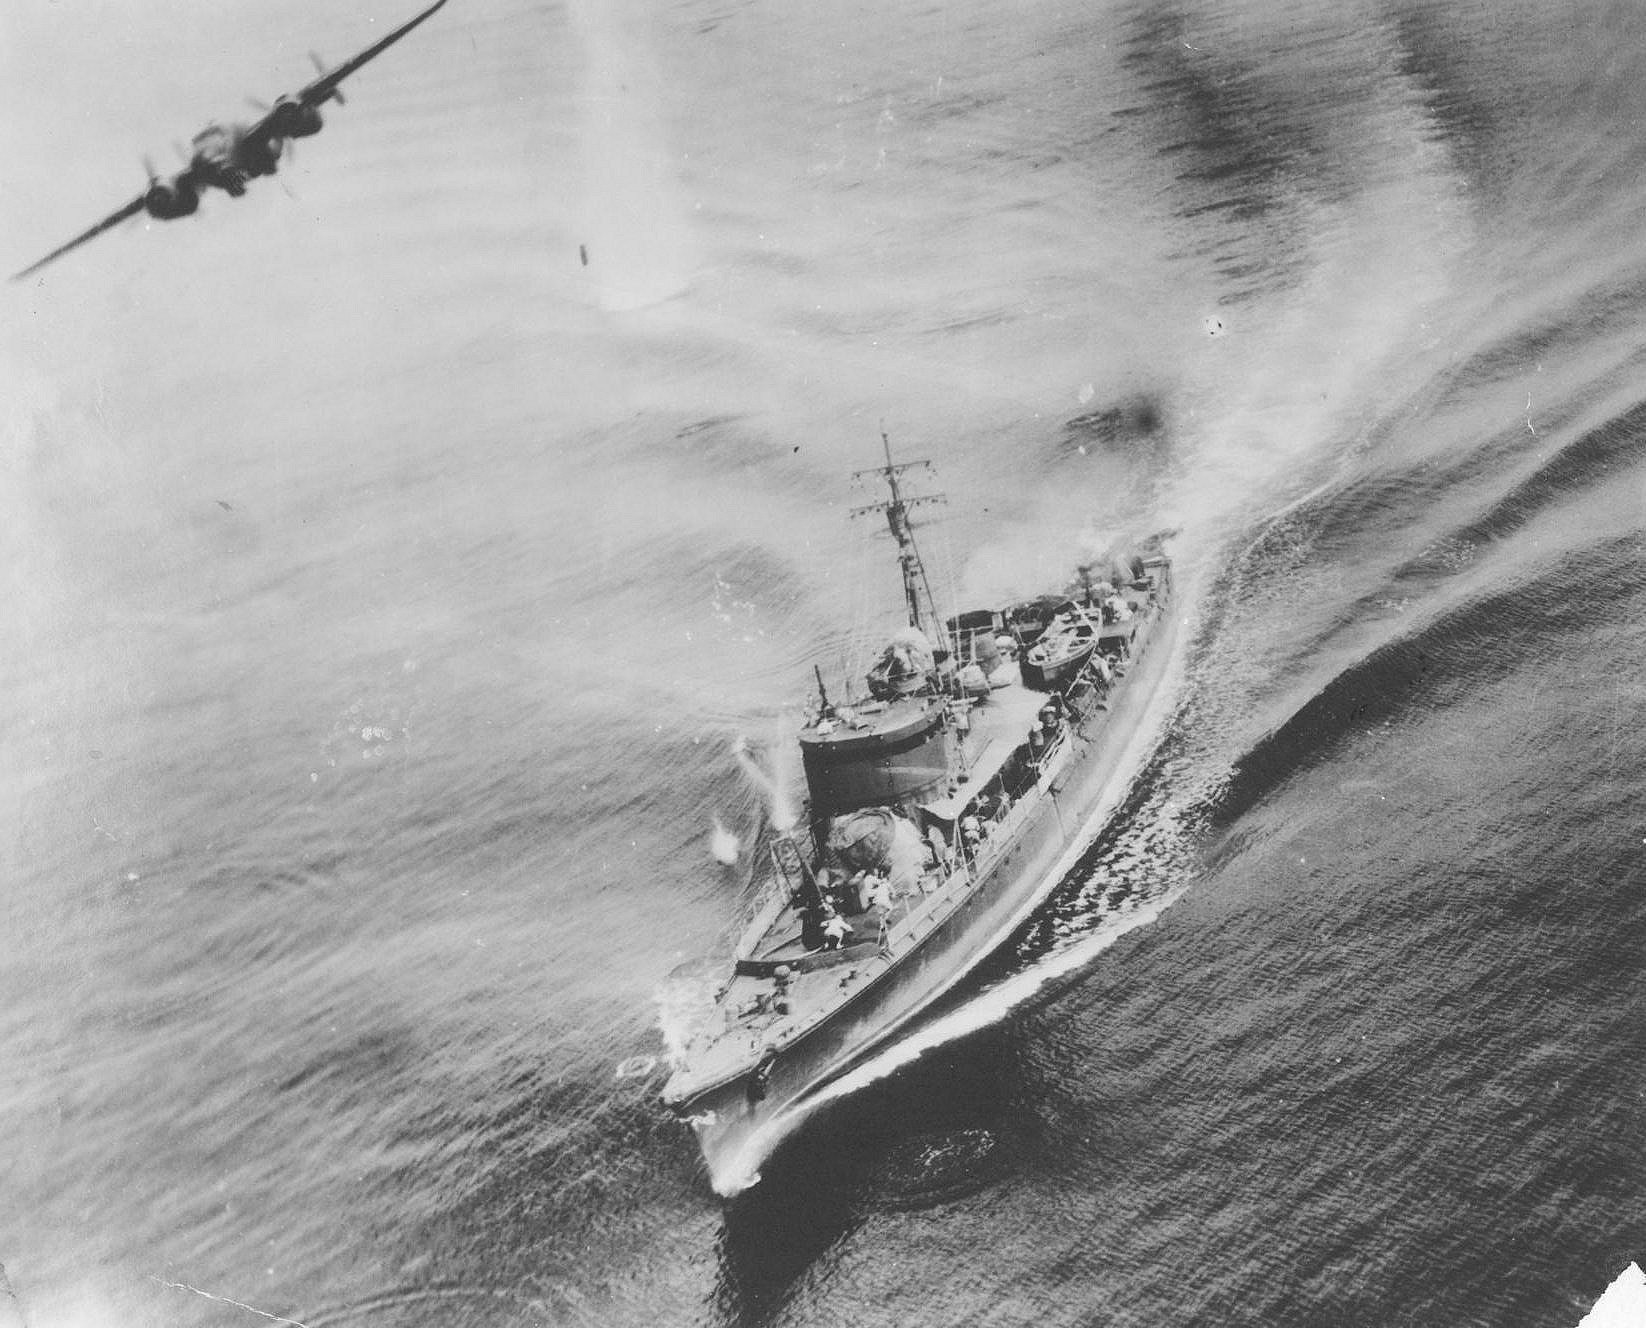 B-25 aircraft of 345th Bombardment Group, US 500th Bombardment Squadron attacking Japanese Sub Chaser CH-39 off Three Island Harbor, New Hanover, New Ireland, 16 Feb 1944, 2 of 3; note bomb in flight